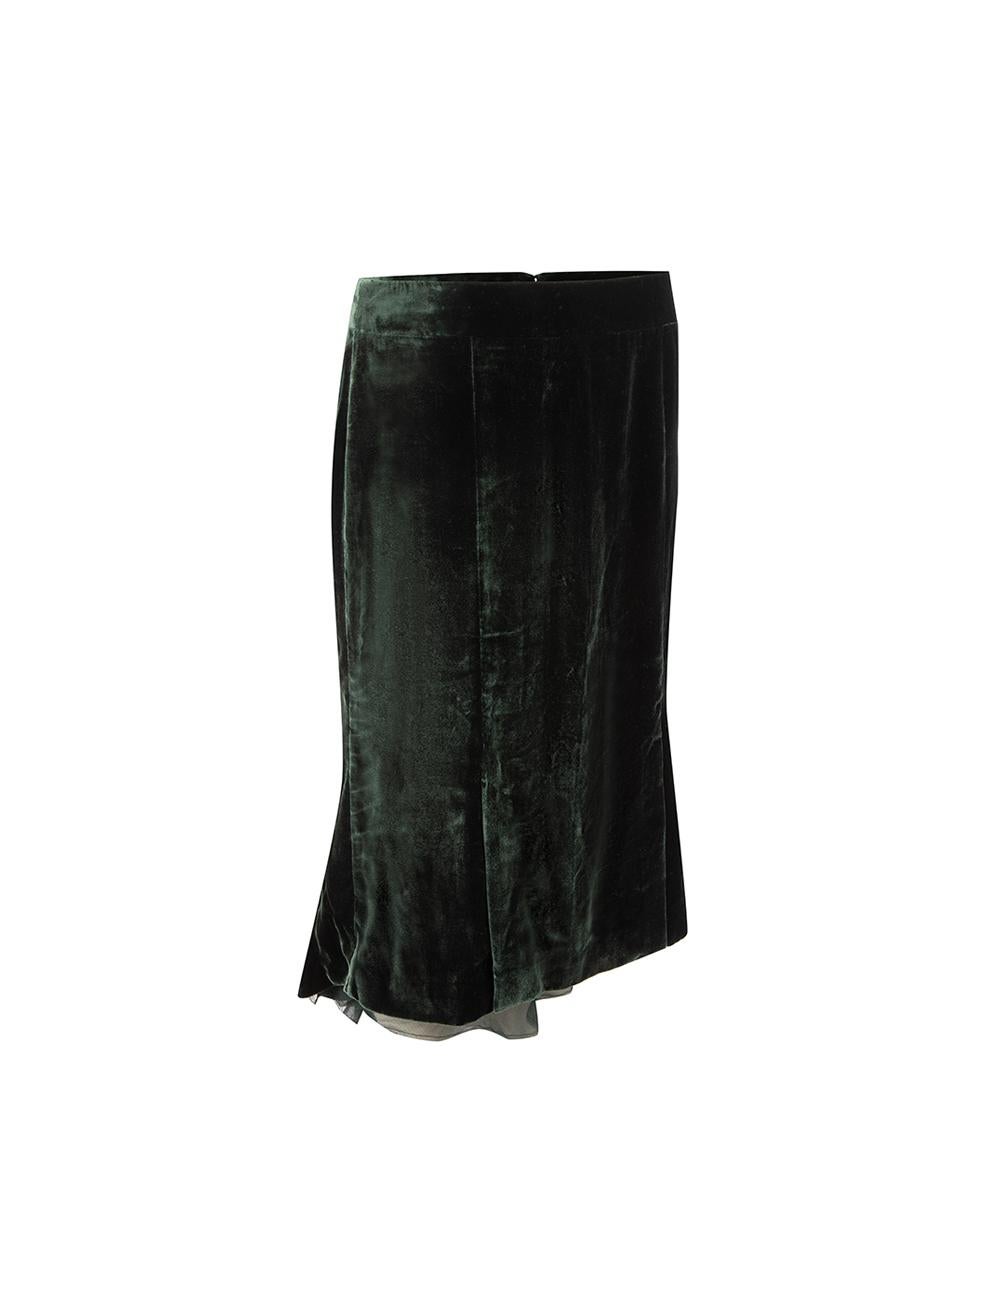 CONDITION is Very good. Hardly any visible wear to skirt is evident on this used Tom Ford designer resale item.



Details


Dark green

Velvet

Straight skirt

Knee length

Back zip closure with hook and eye

Front and side slits





Made in